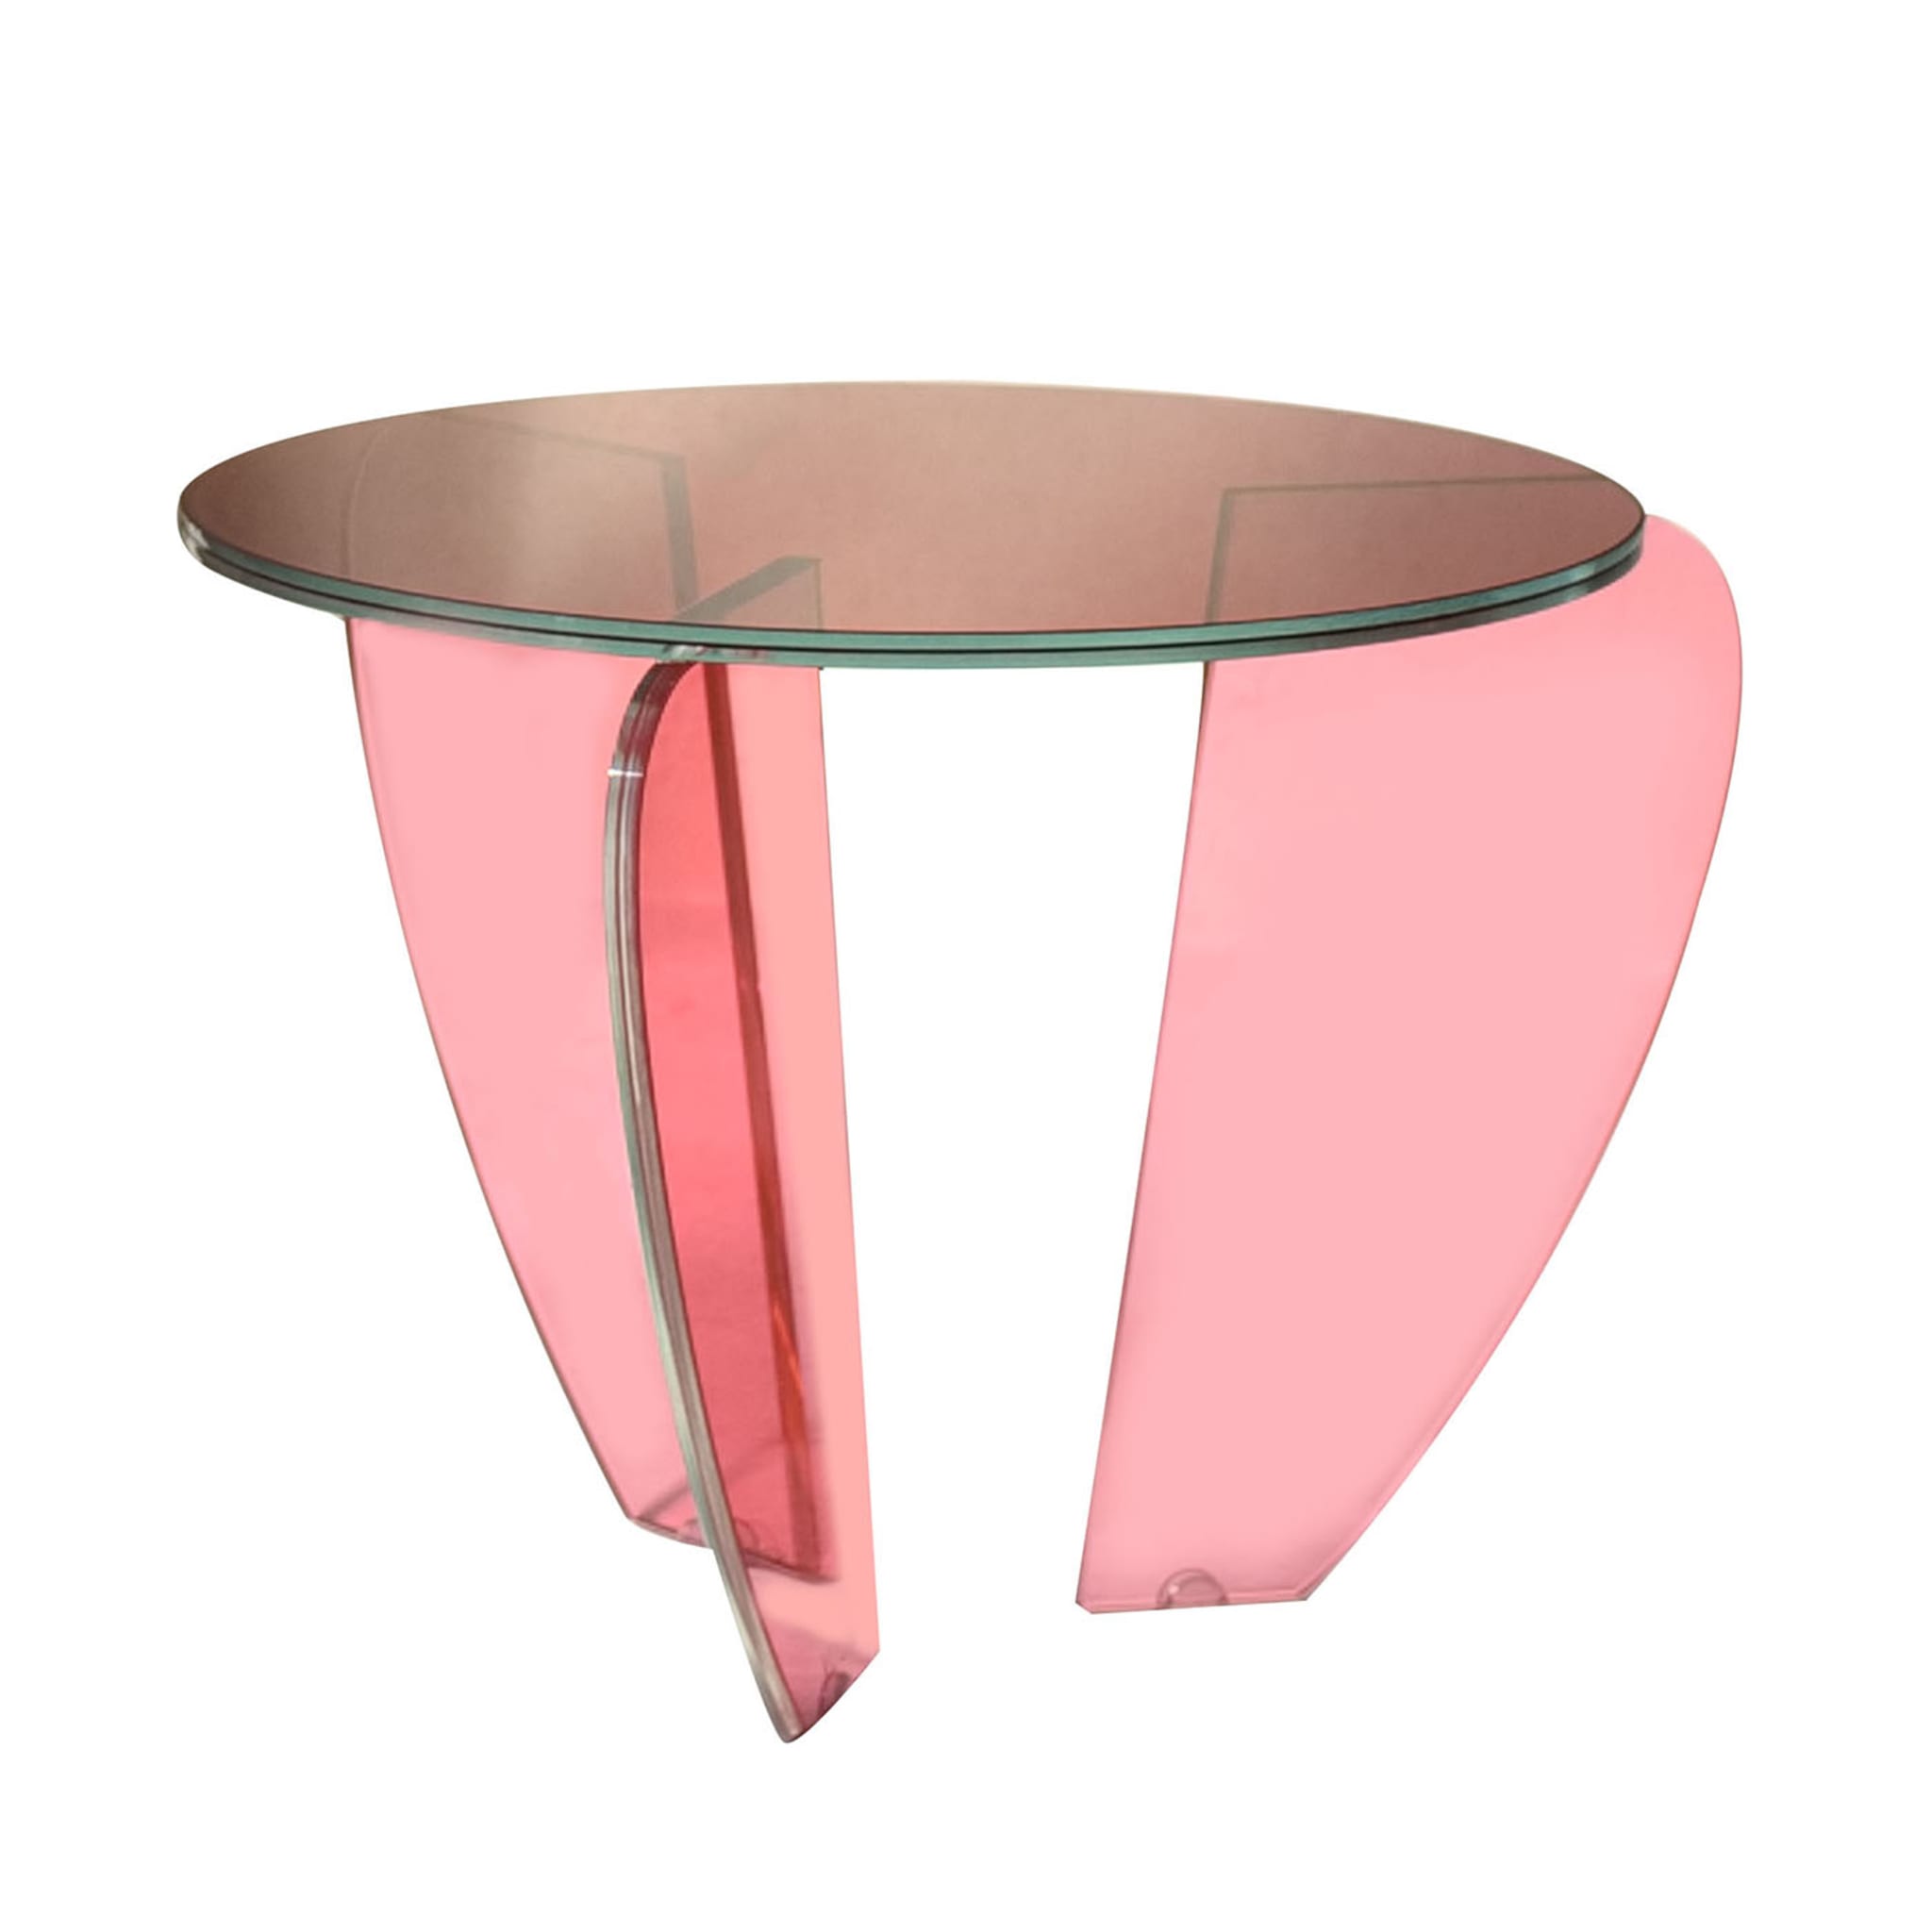 Teo Small Colored Side Table by Andrea Petterini - Main view